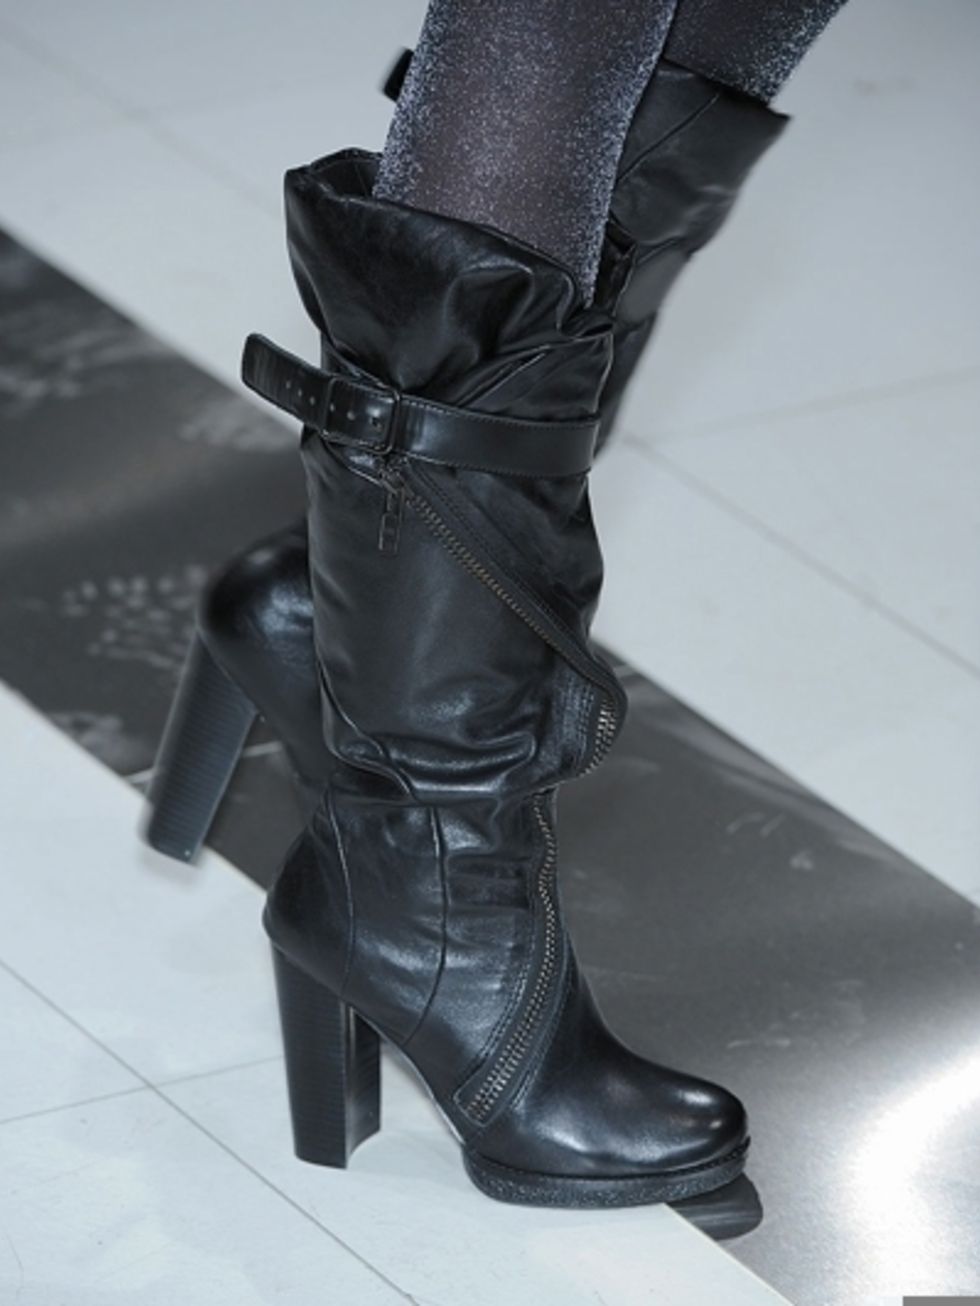 Boot, Leather, Fashion, Material property, Riding boot, Knee-high boot, Fashion design, Liver, Natural material, Motorcycle boot, 